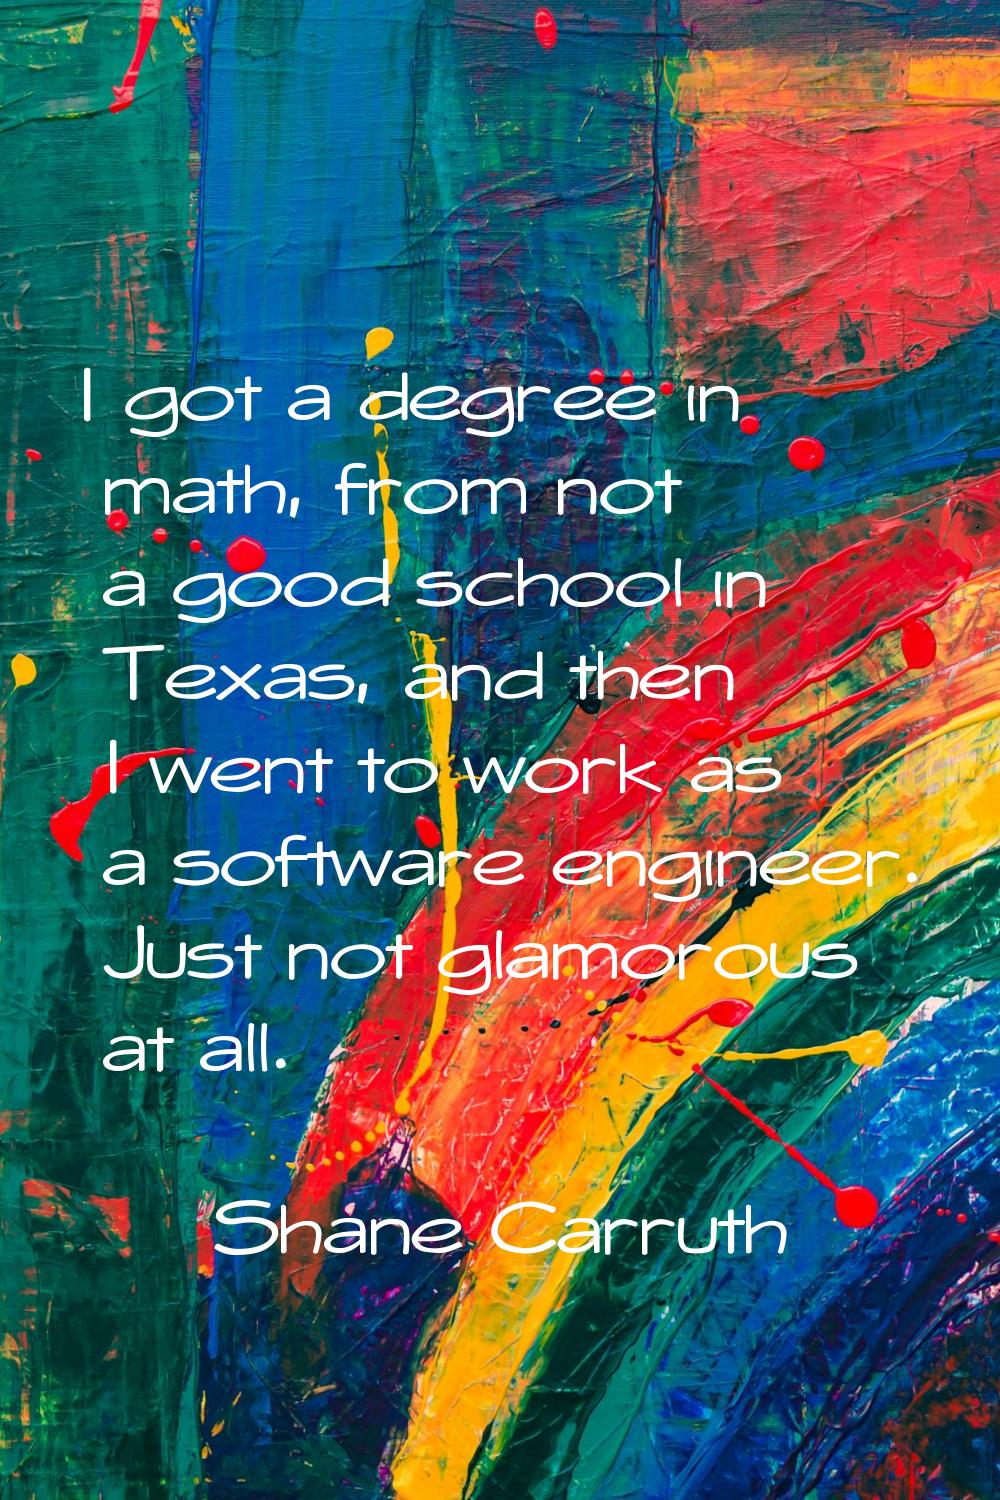 I got a degree in math, from not a good school in Texas, and then I went to work as a software engi